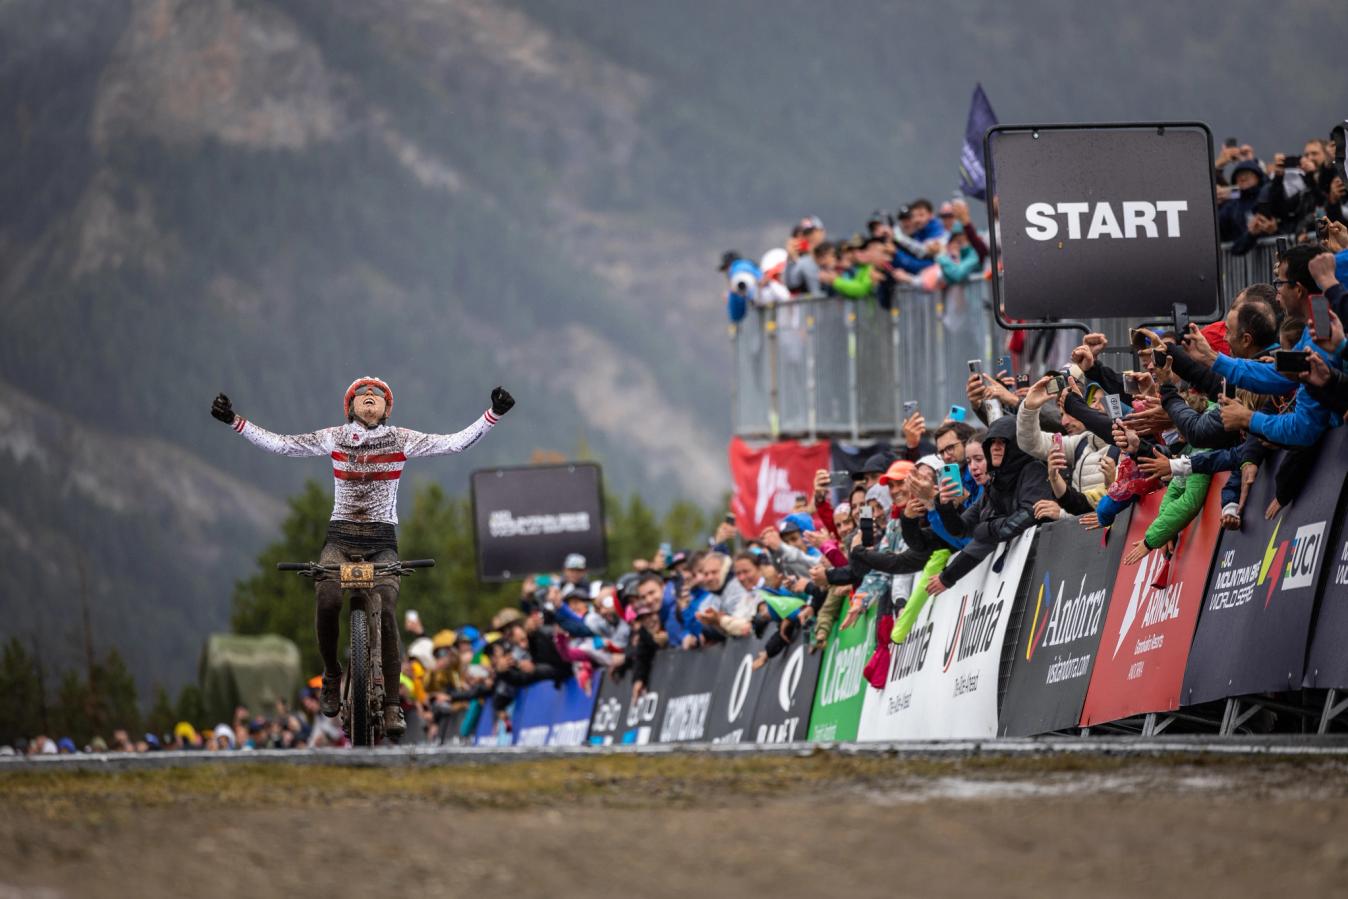 Mona Mitterwallner celebrated her hard-fought victory in the atmospheric surrounds of Andorra